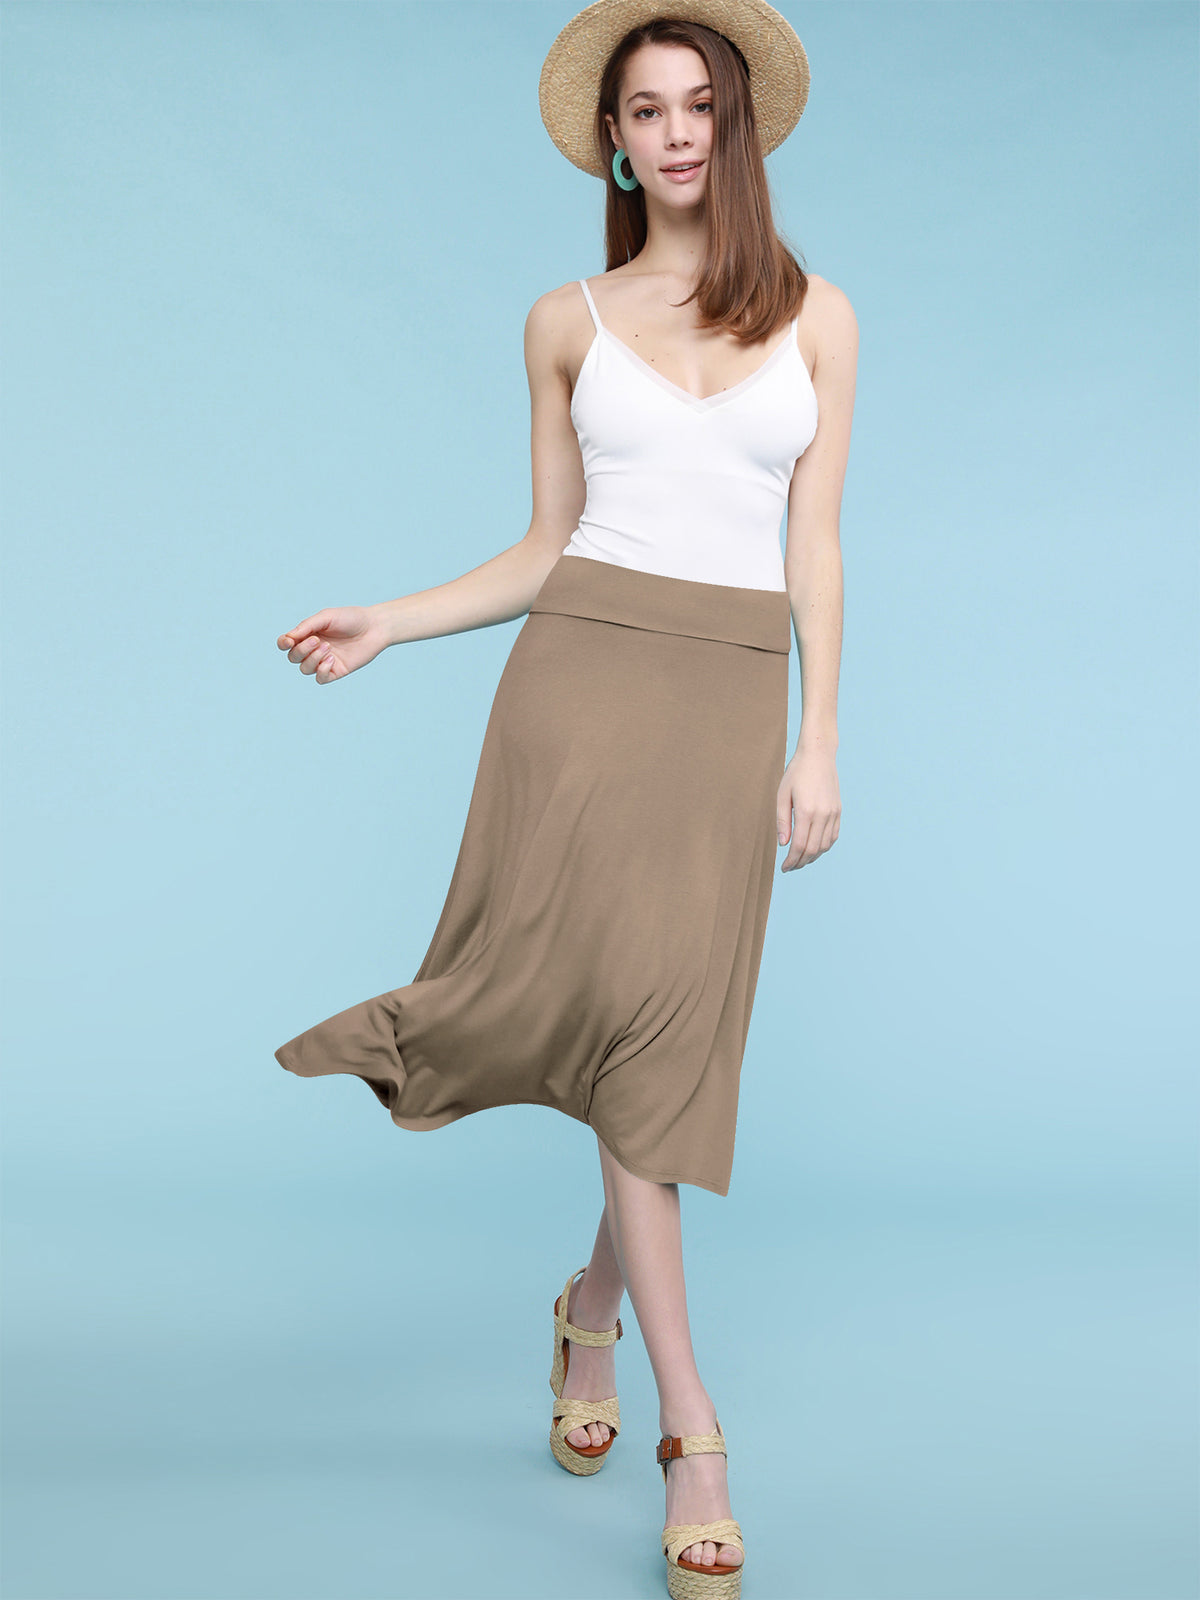 Everyday Wear Women's Solid Ombre Lightweight Flare Midi Pull On Closure Skirt